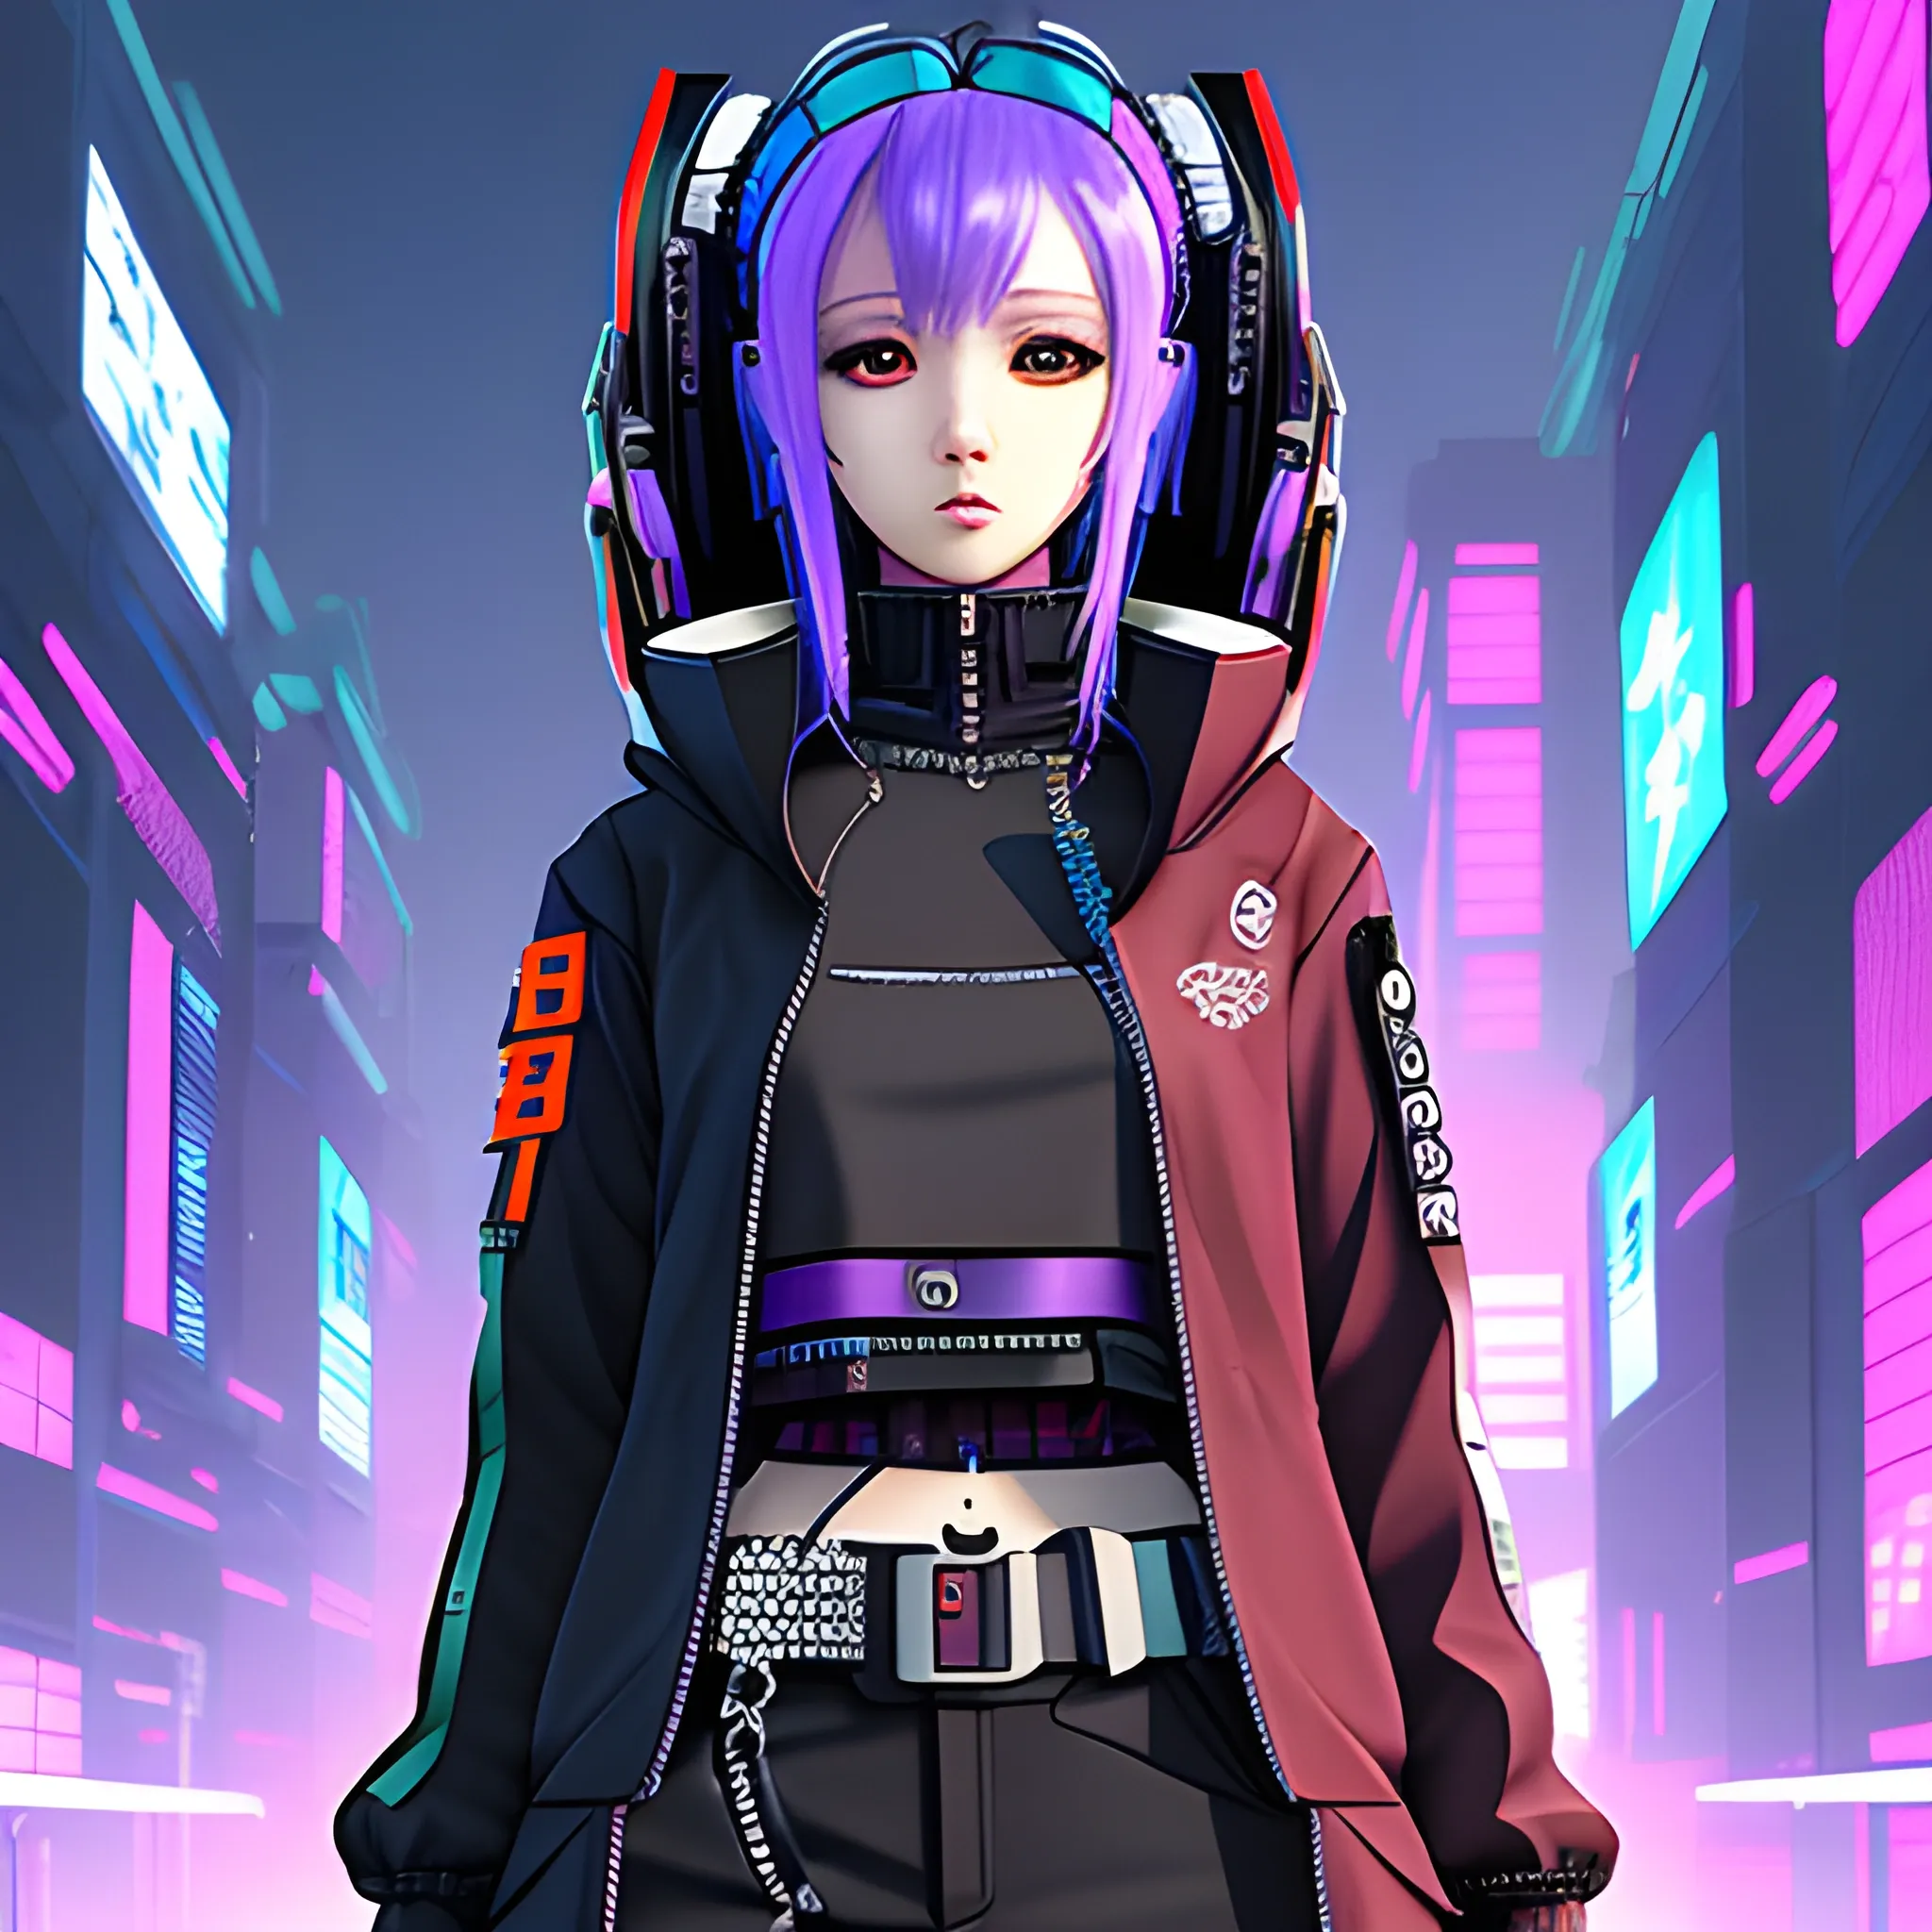 BGMI BACKGROUND & CLOTHES, CYBER PUNK, ANIME